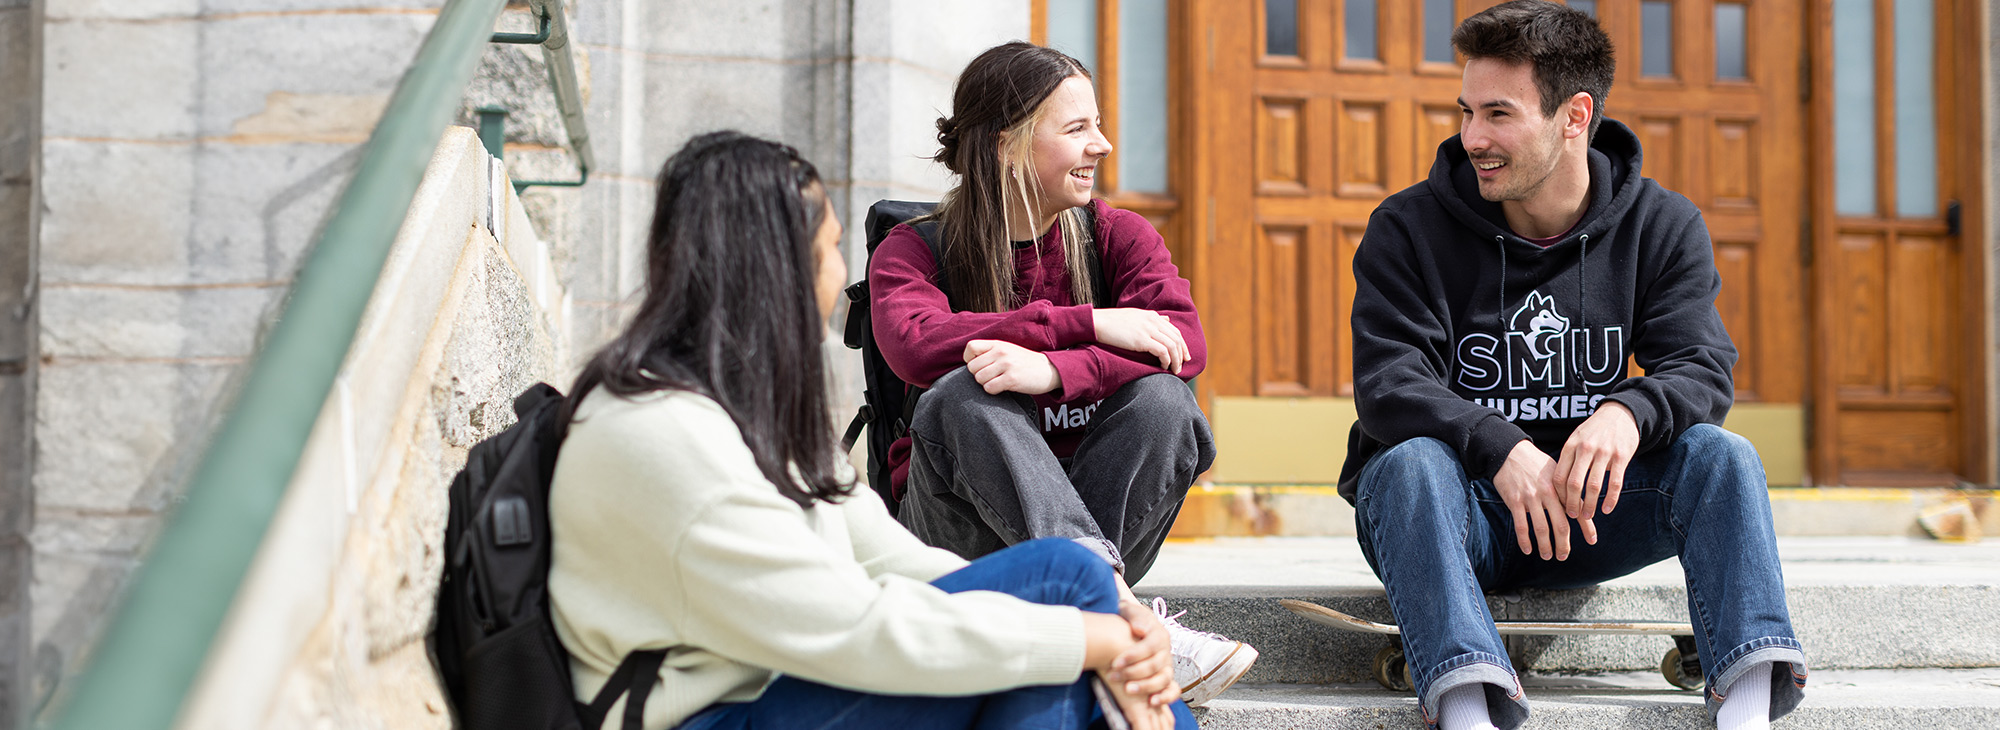 Three students sitting and chatting an a set of stairs.